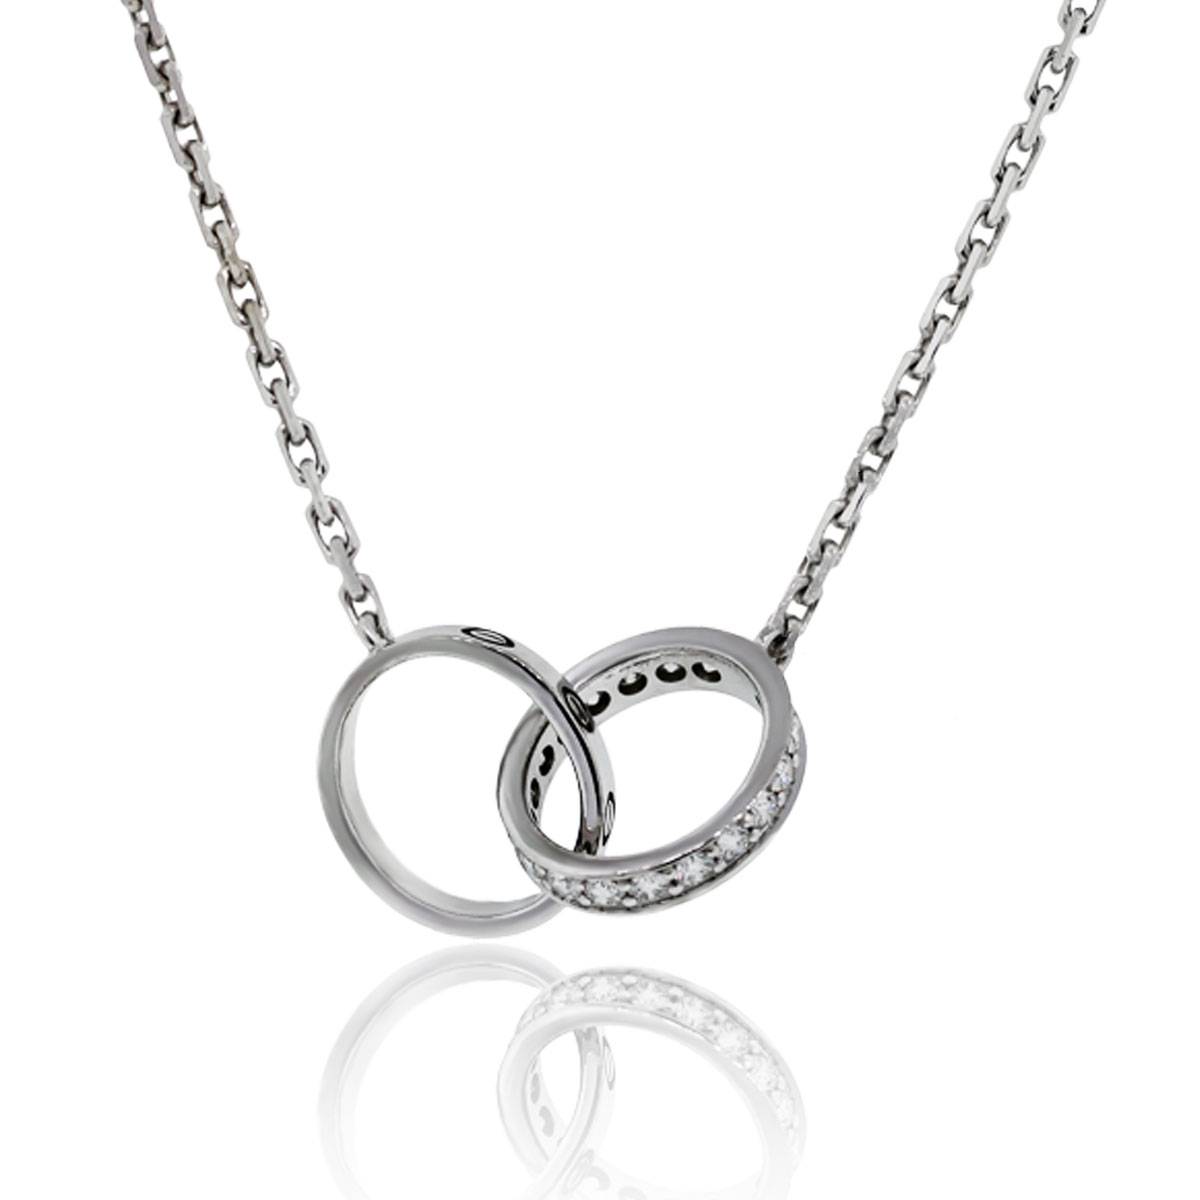 Cartier Baby Love necklace